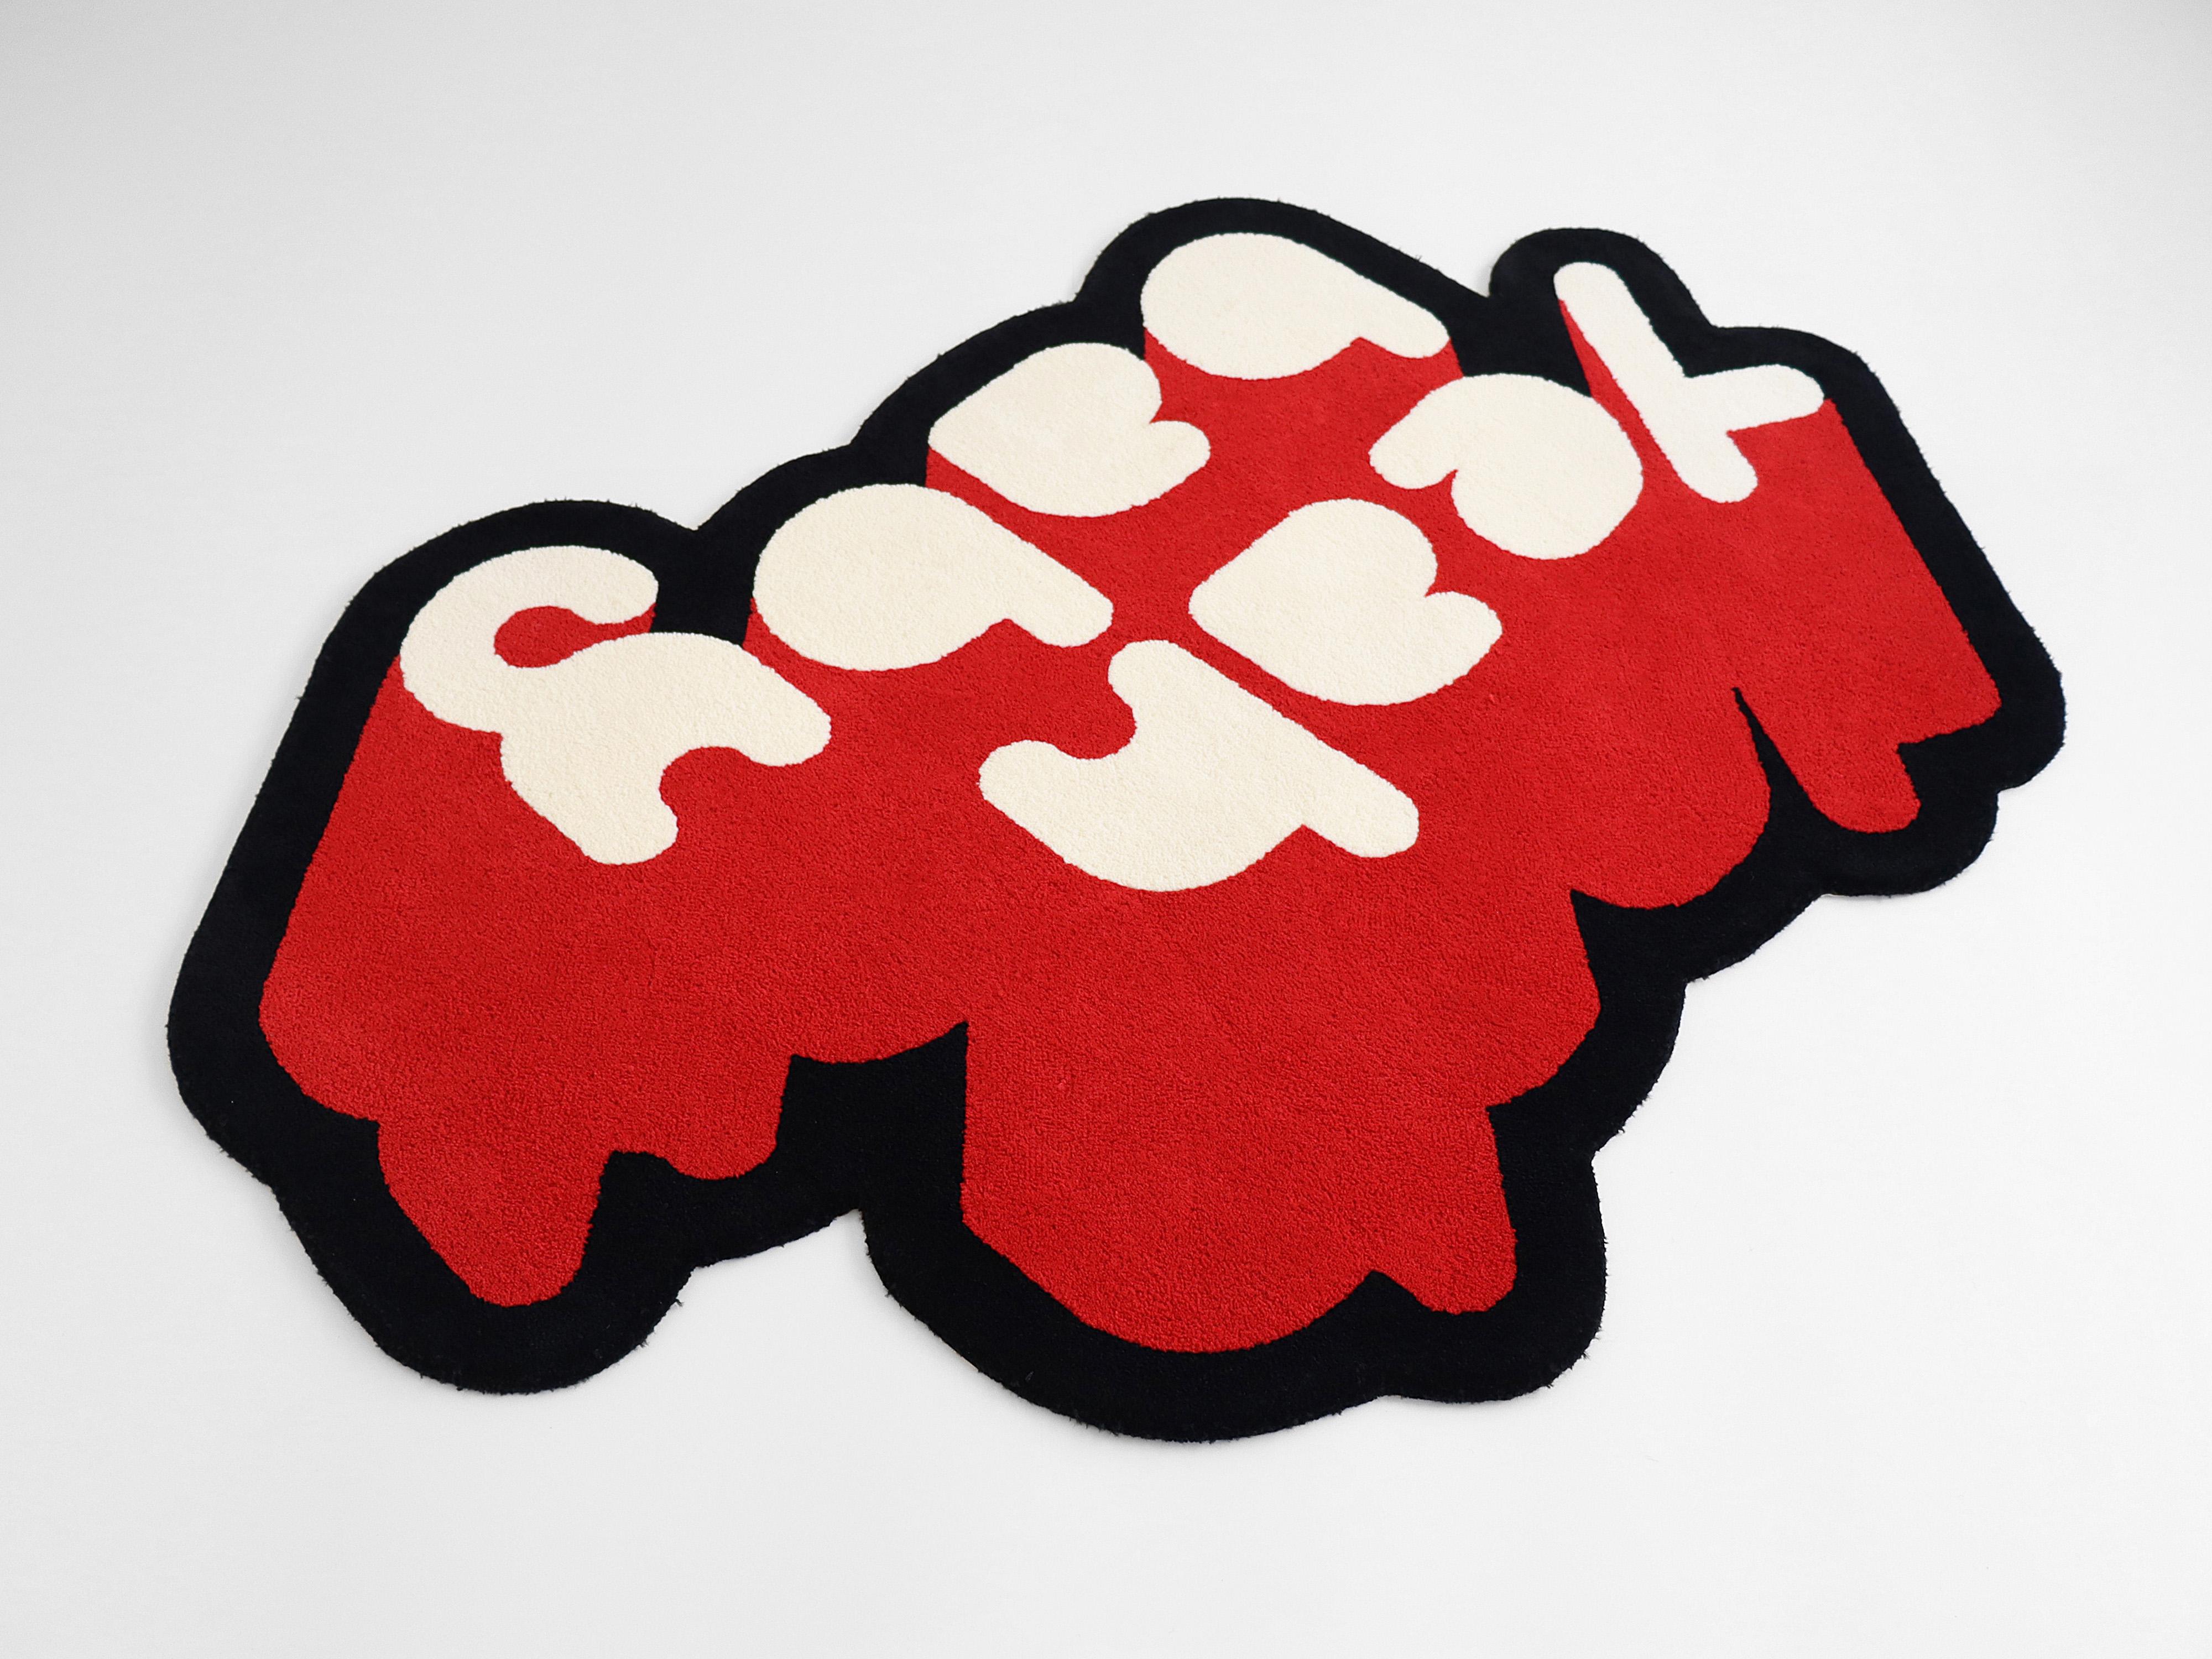 Red, White and Black Yeah Baby Rug from Graffiti Collection by Paulo Kobylka For Sale 2